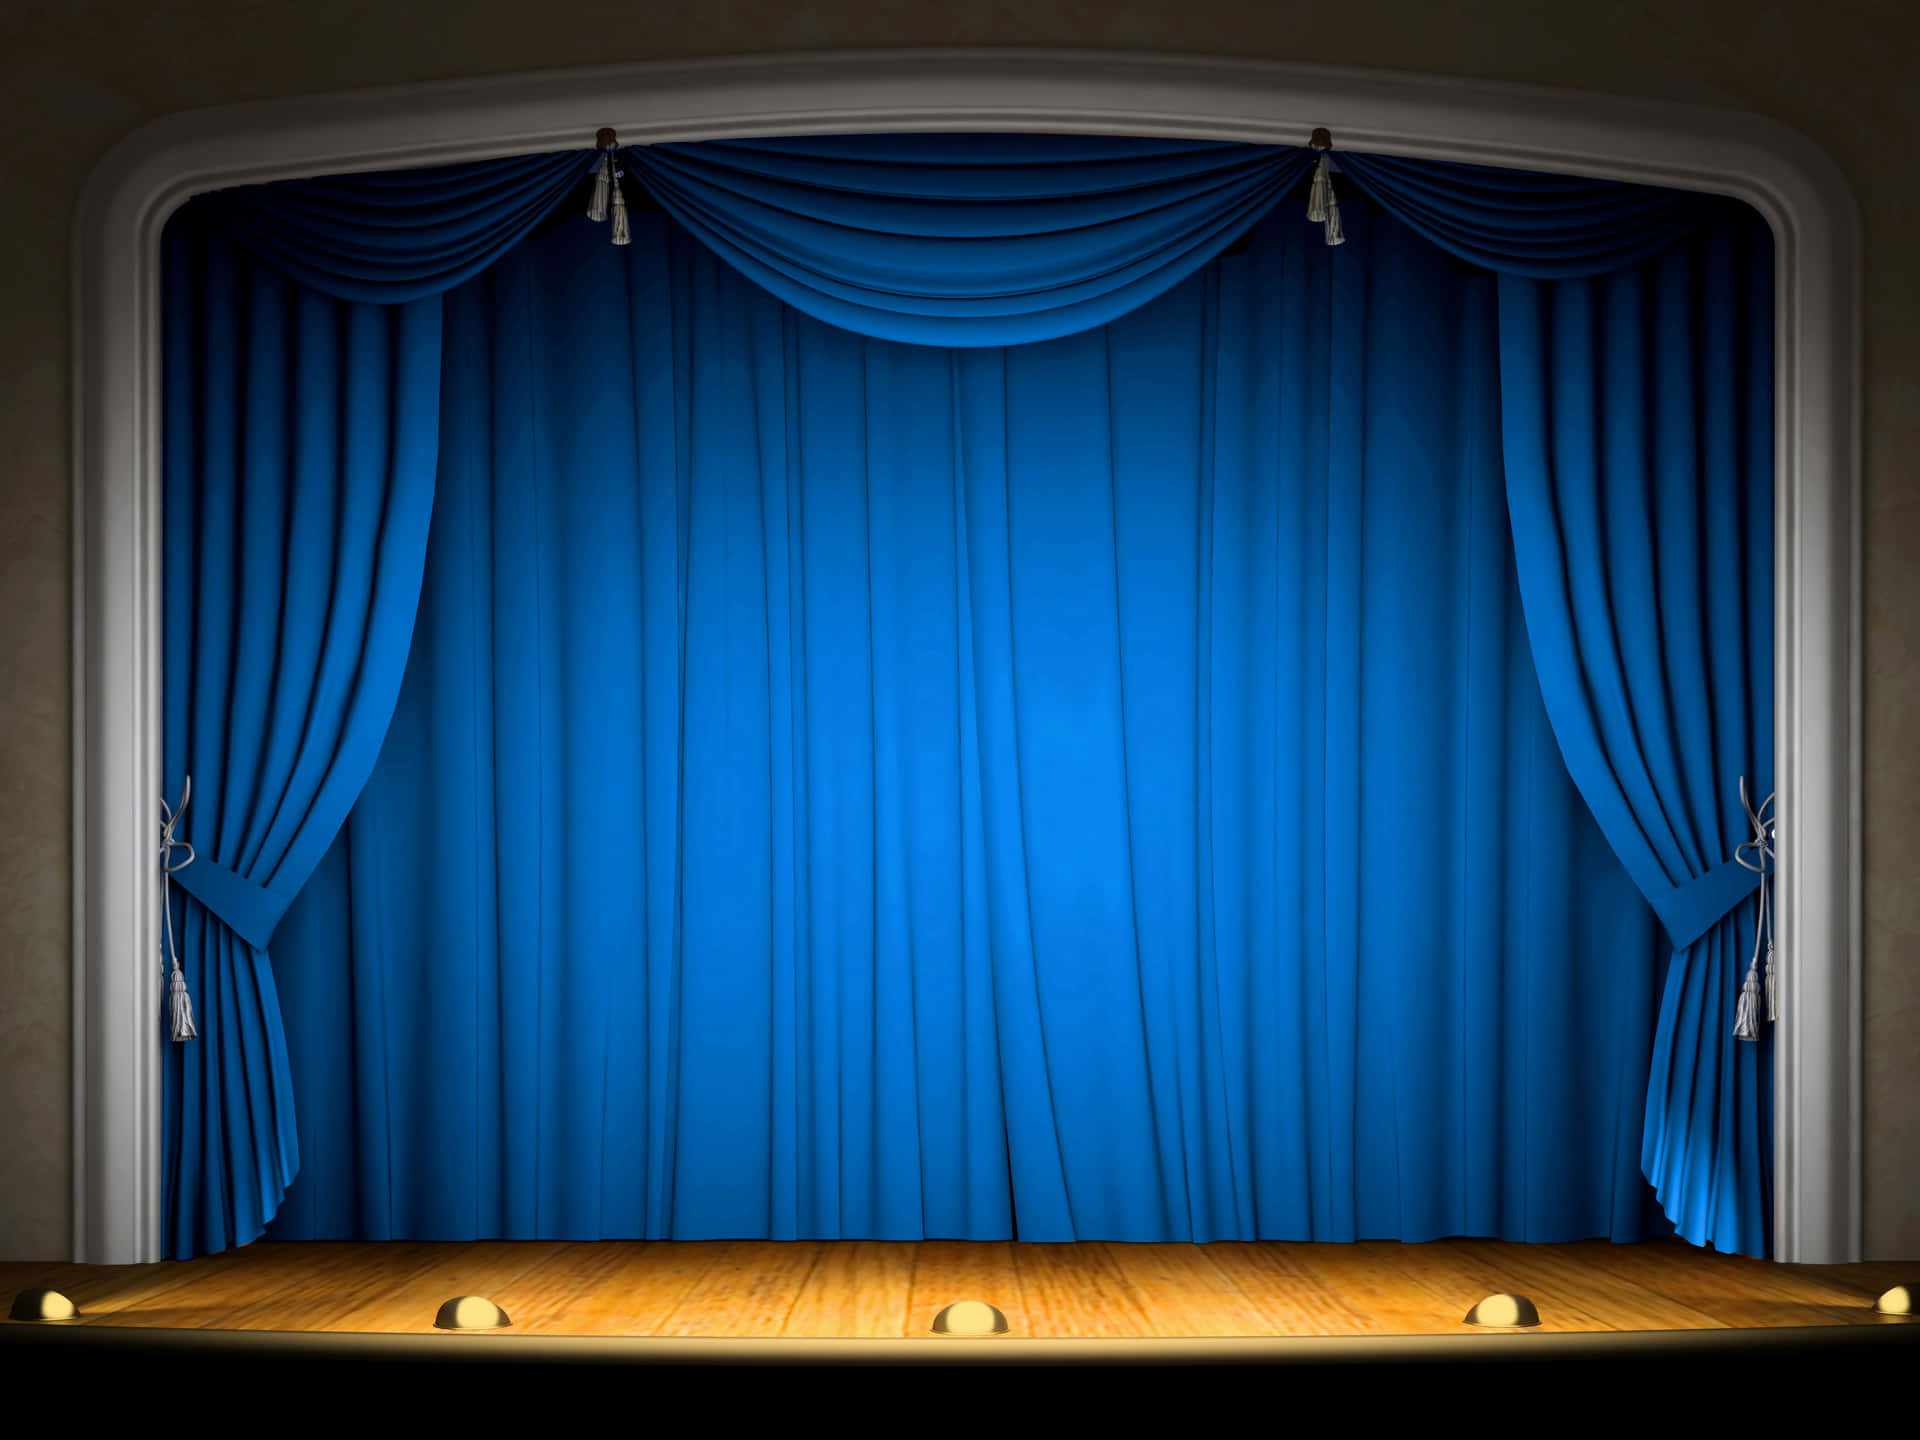 A Blue Curtain On A Stage With A Wooden Floor